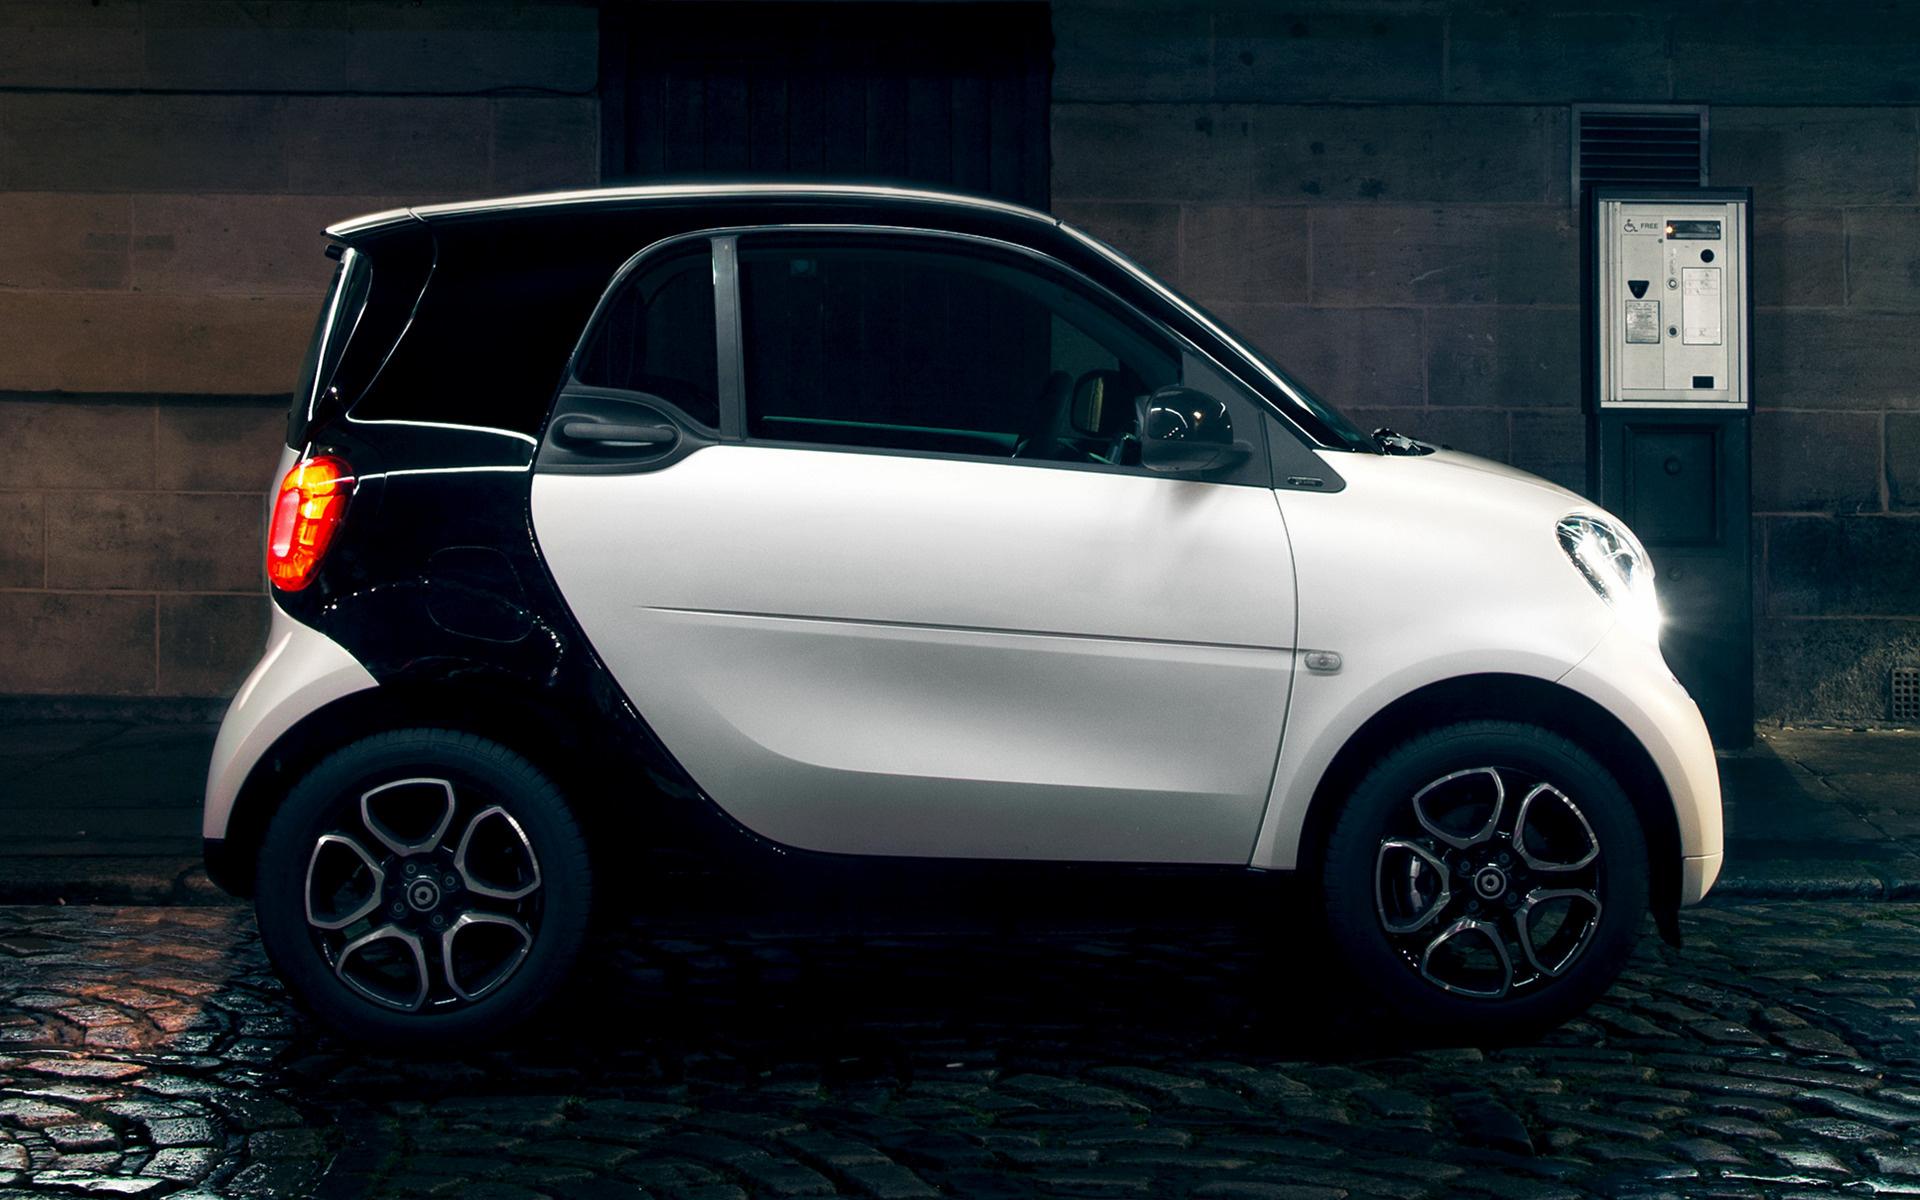 Smart Fortwo prime (UK) and HD Image